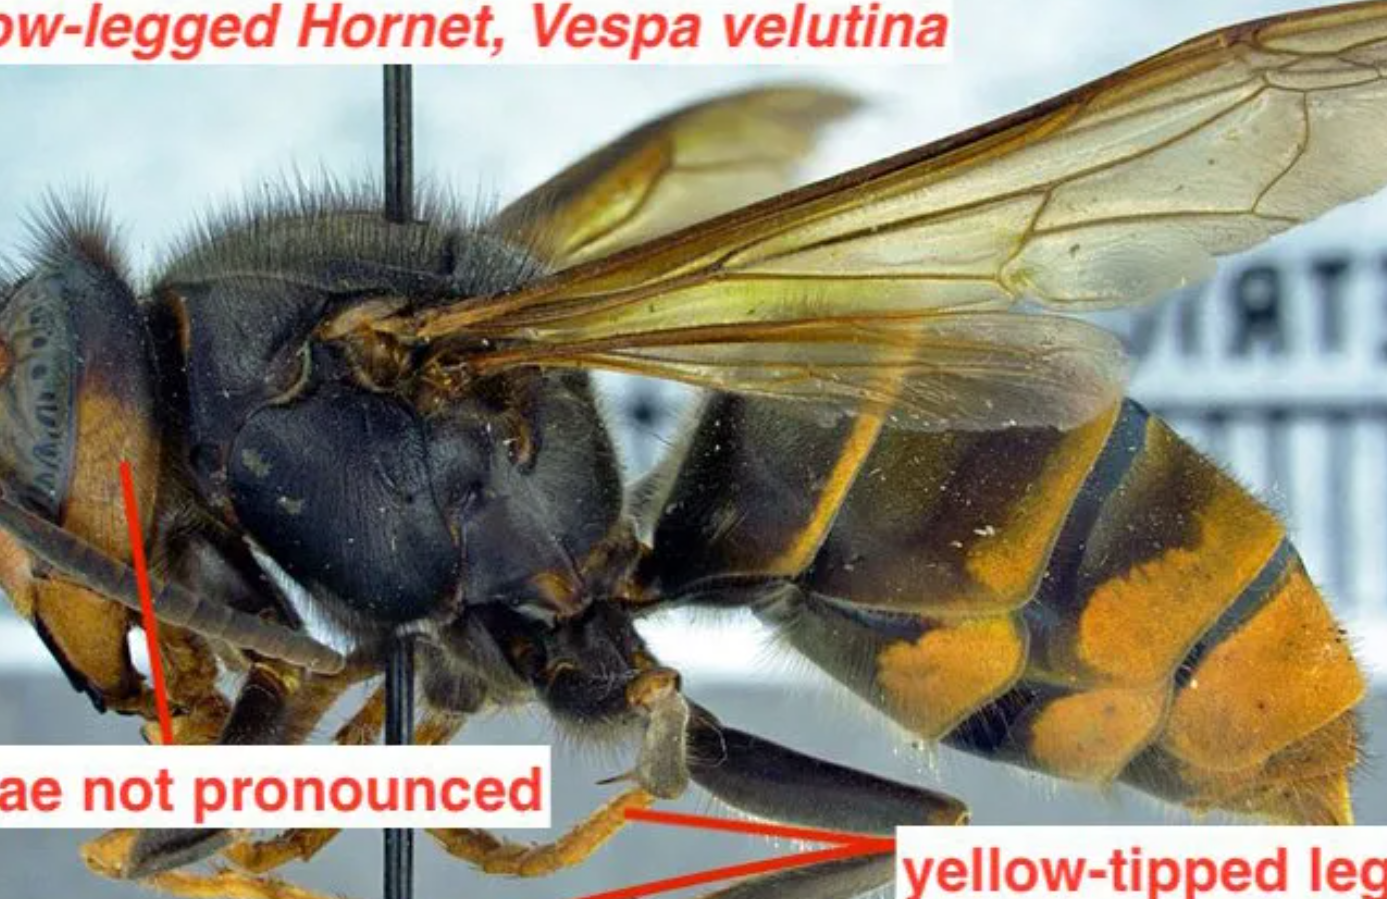 Invasive Yellow-Legged Hornet Raises Concern in South Carolina First Detection Sparks Beekeeping Alert